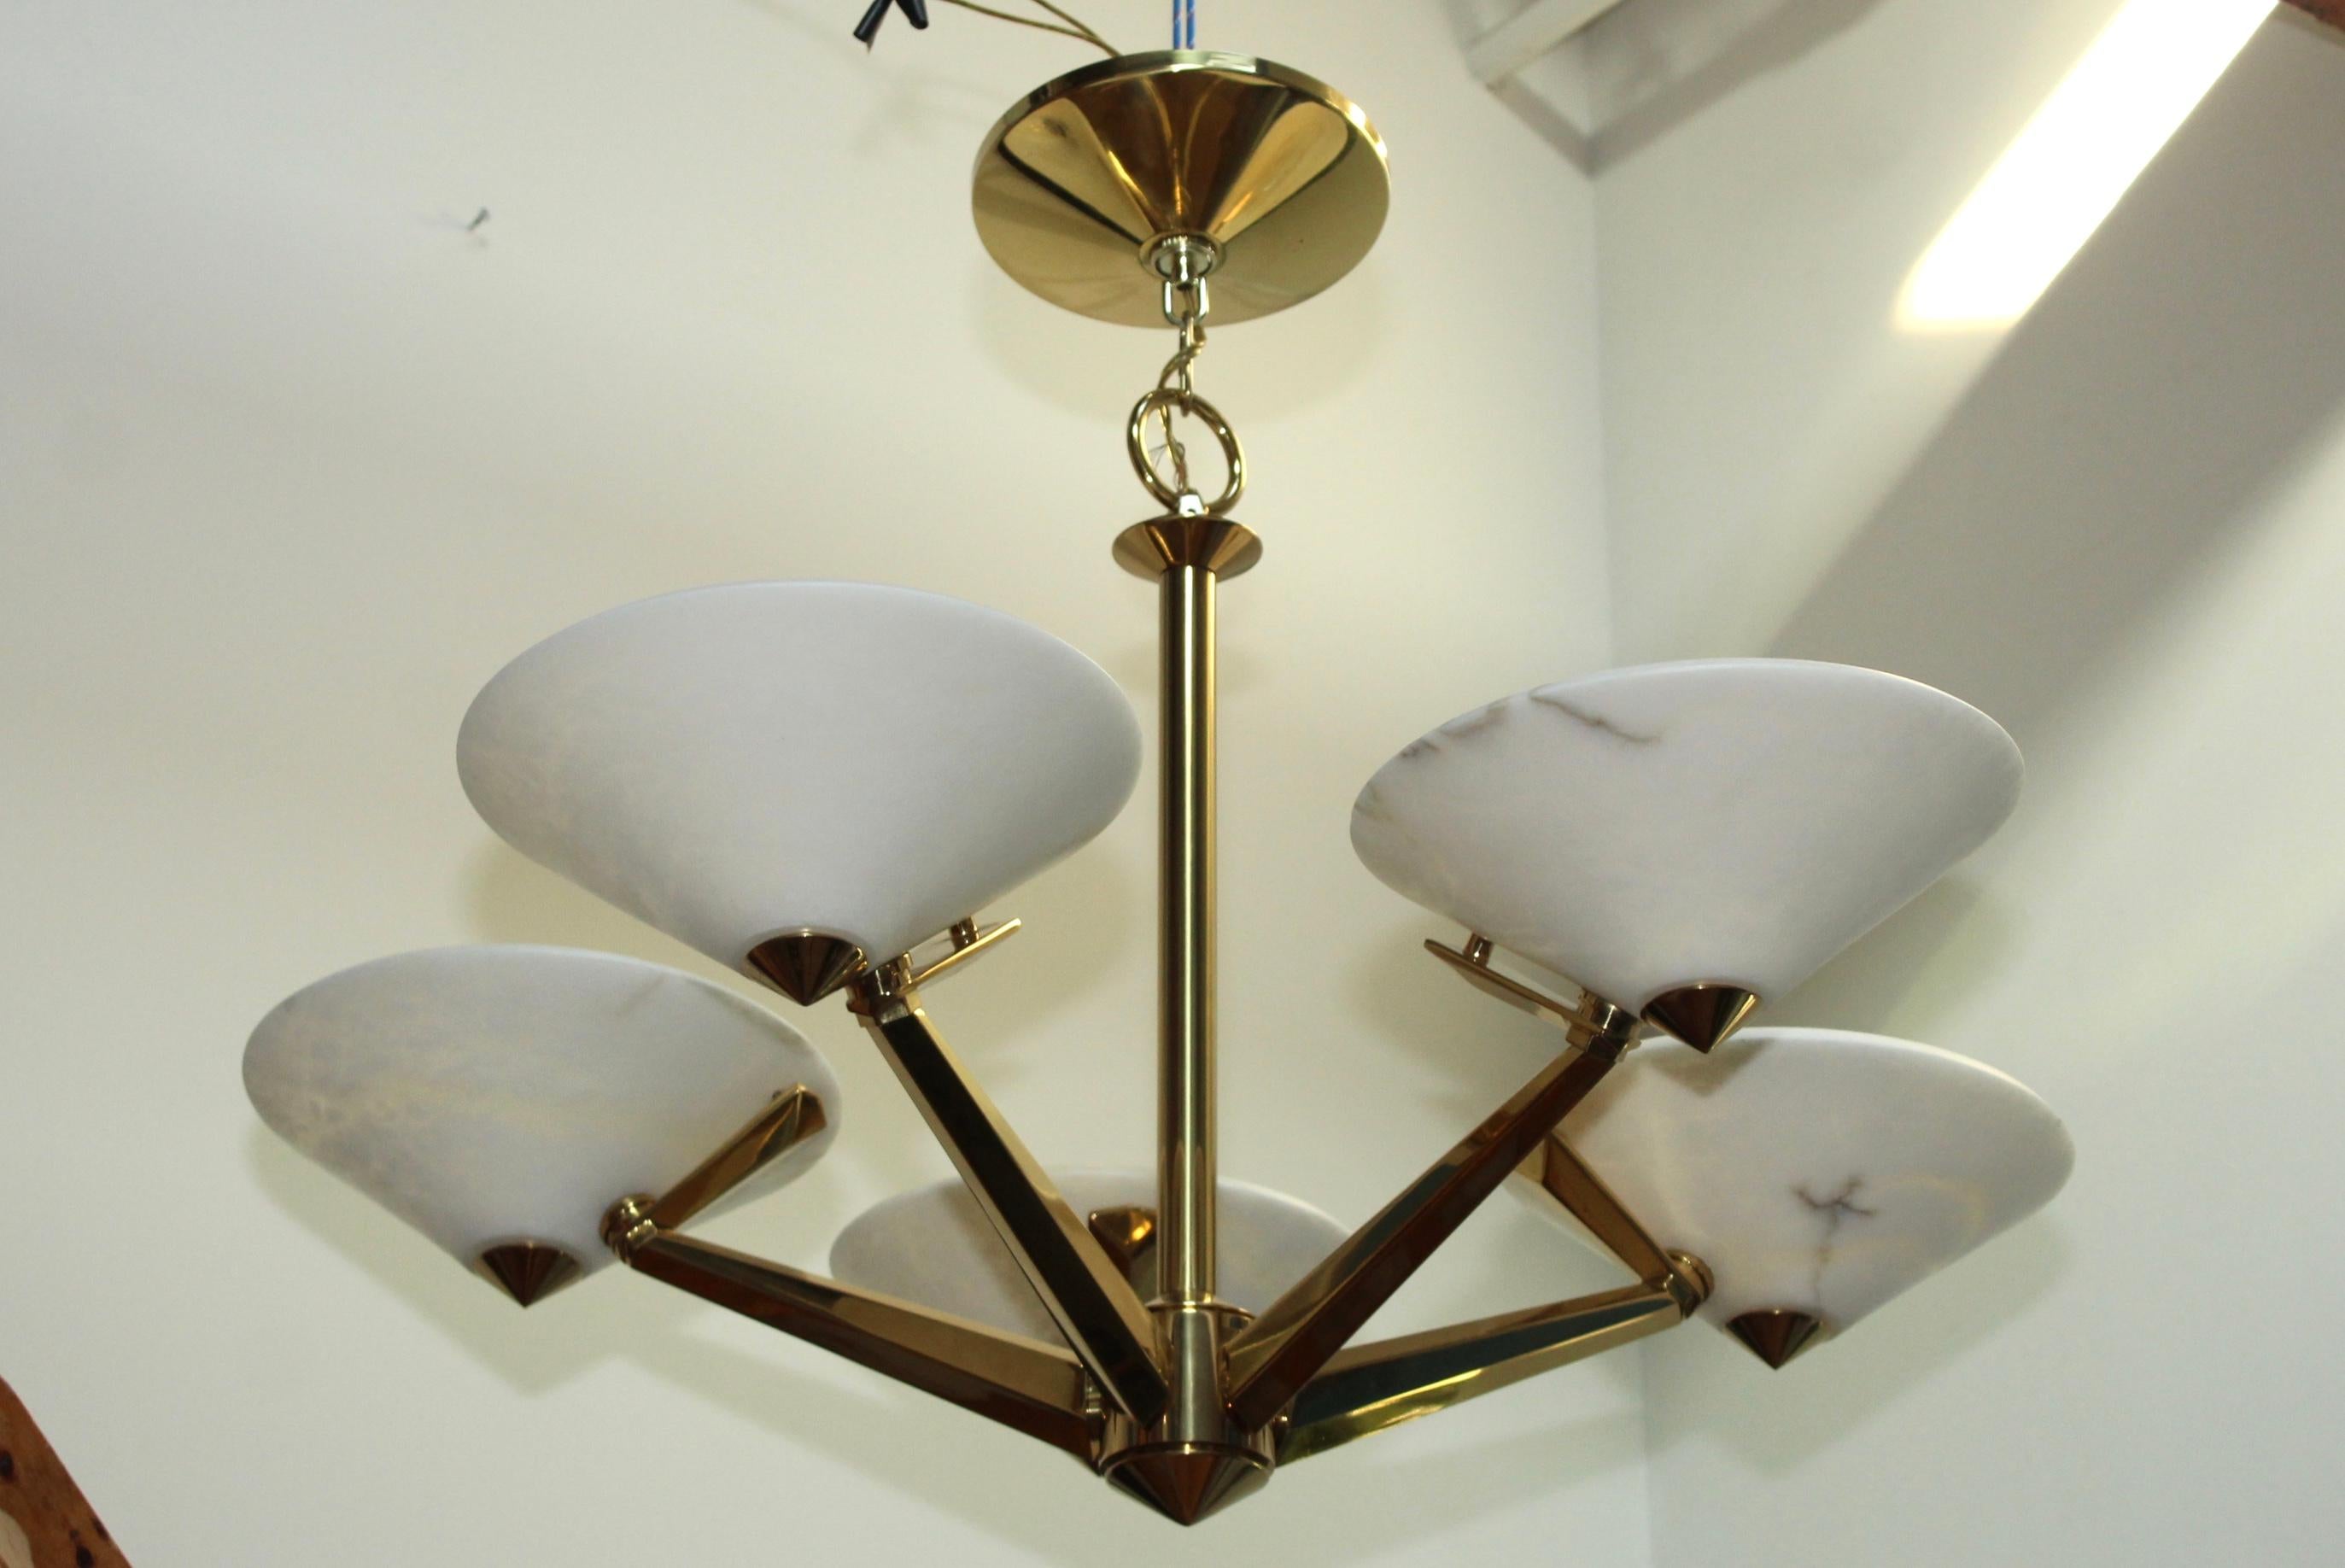 Stunning 1970s brass and alabaster chandelier by Lightolier made in Spain. 

The chain height can be adjusted.